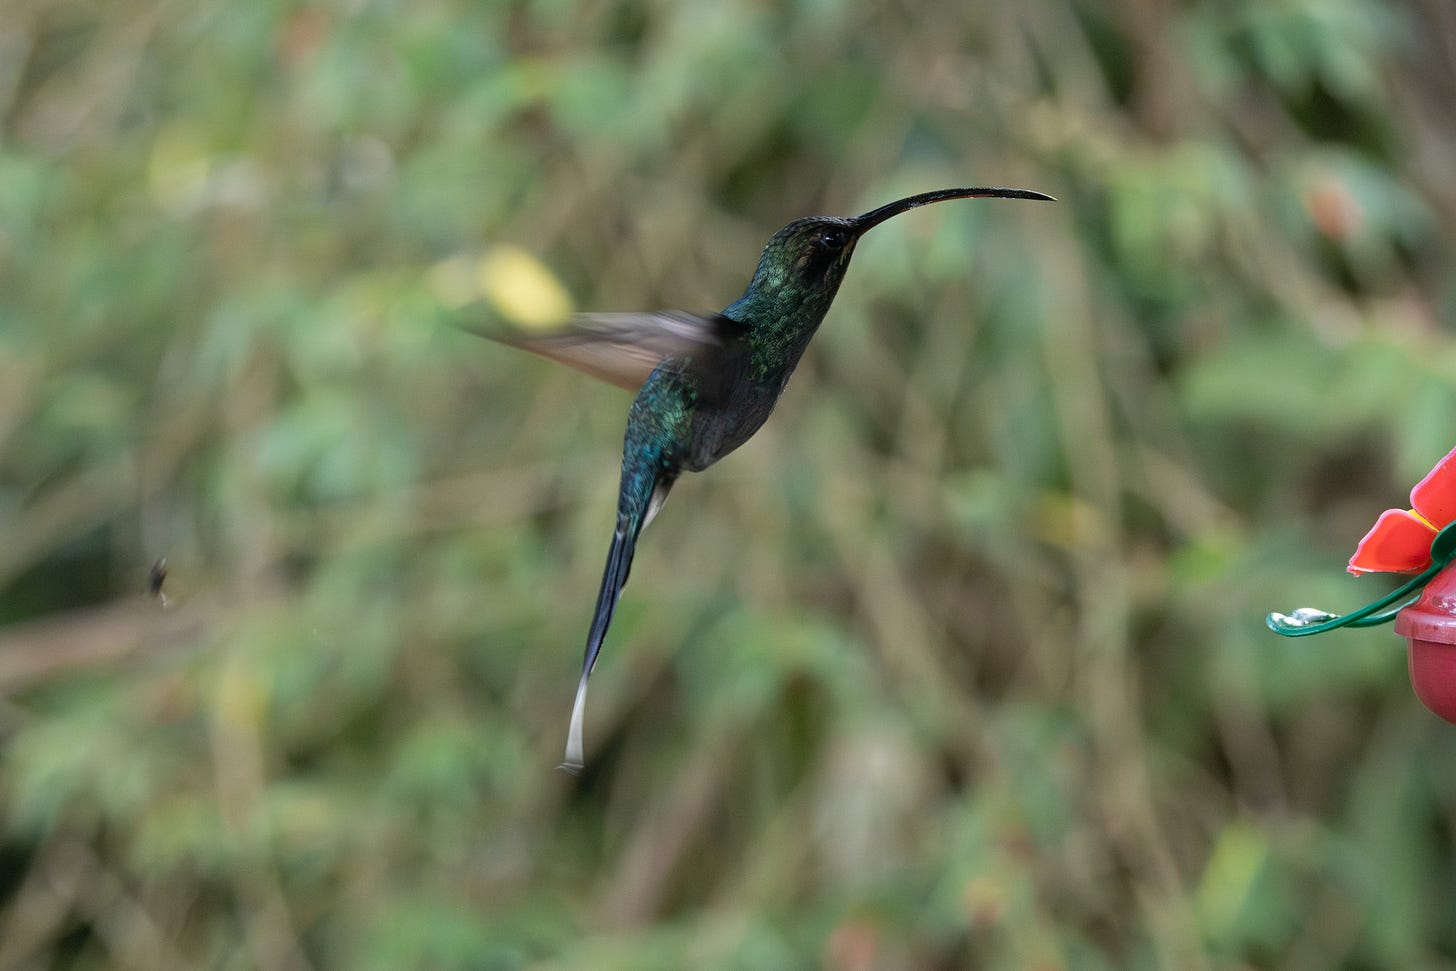 a large, green hummingbird hovering. it has a long tail with white at the tip and a very long, downcurved beak.